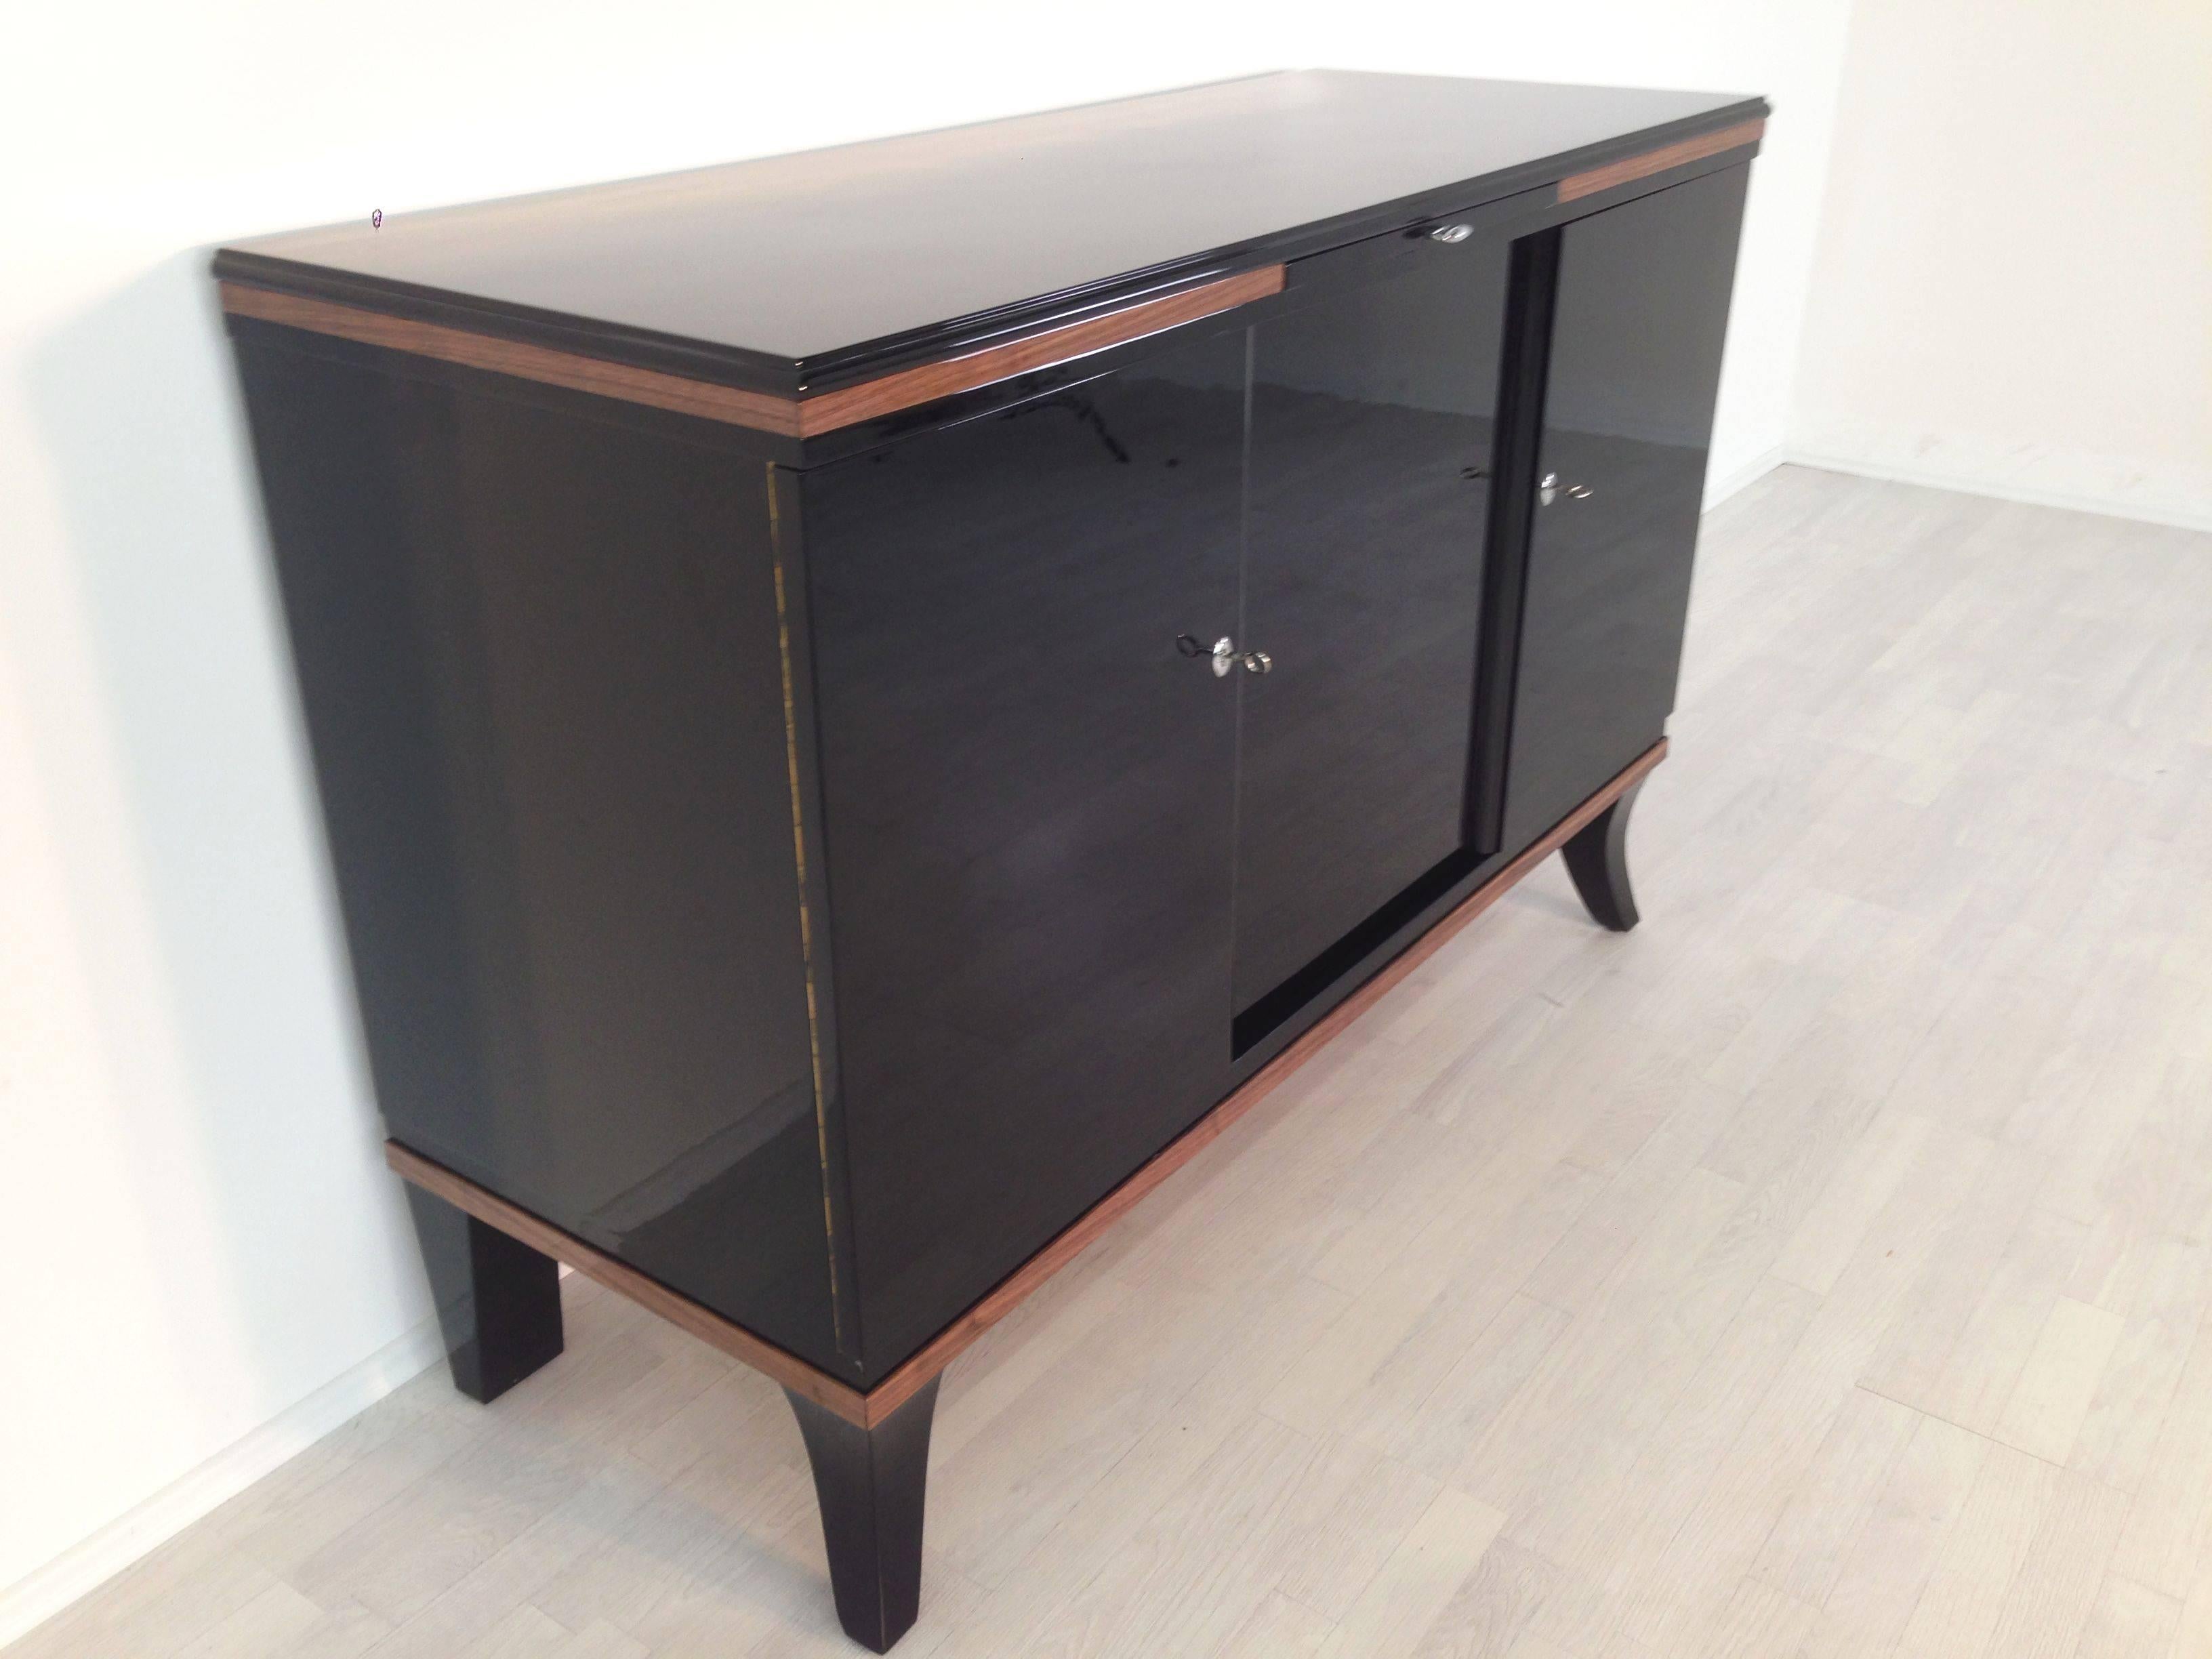 Simple Art Deco style sideboard with great walnut details and curved feet. A straight forward but very elegant design with unique details.

    - high quality piano lacquer
    - extension with marble plate
    - clean interior
    - mahogany